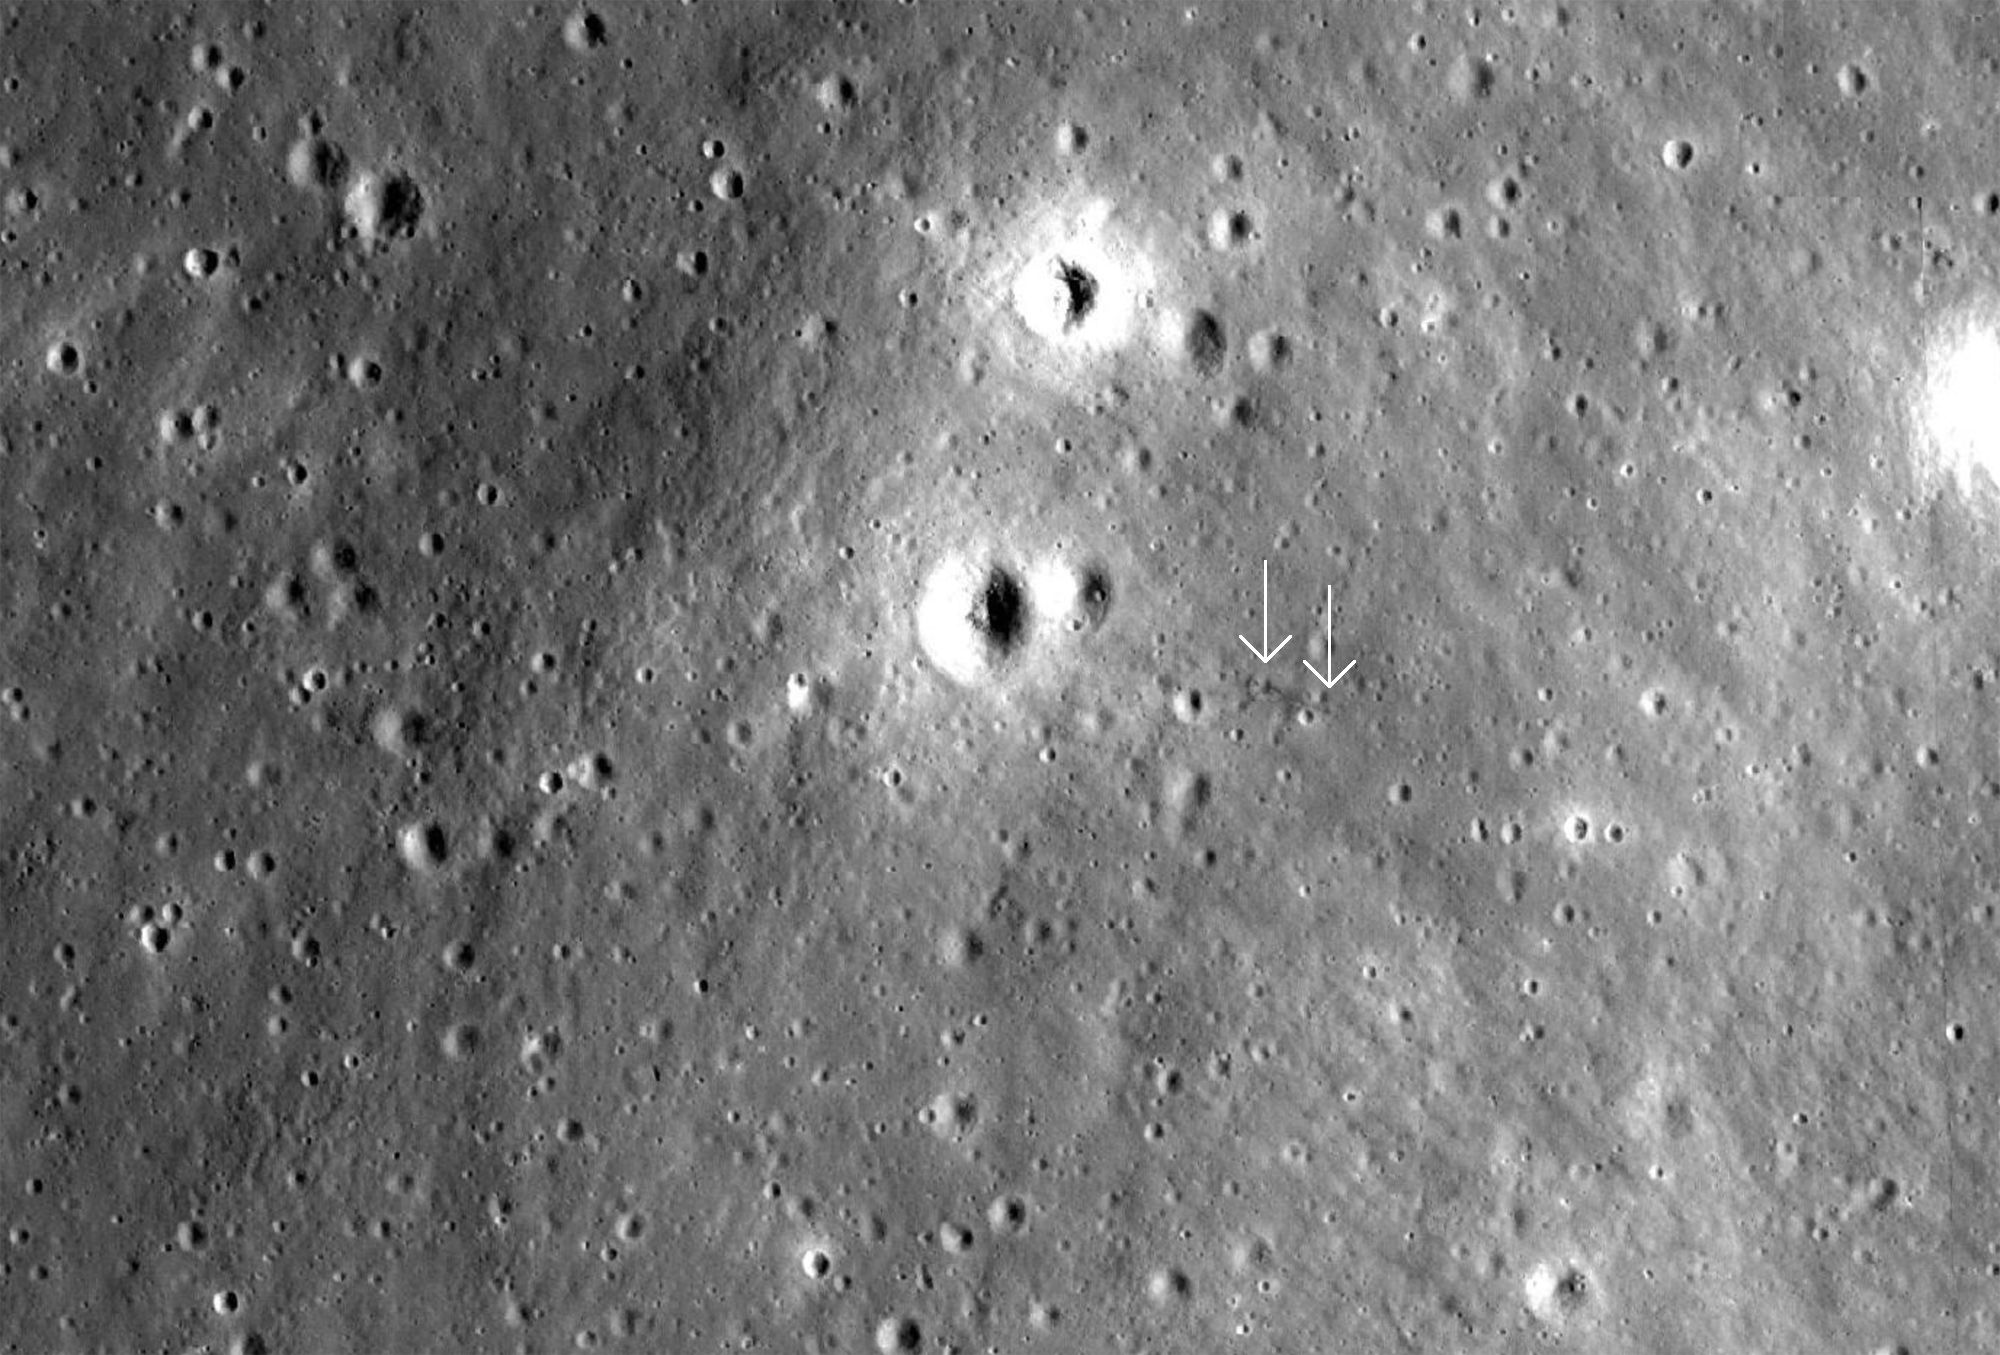 An area of the Moon where the Apollo 12 Ascent stage may have crashed, leaving a dark furrow in the surface (arrowed). Credit: NASA/GSFC/Arizona State University / Quickmap